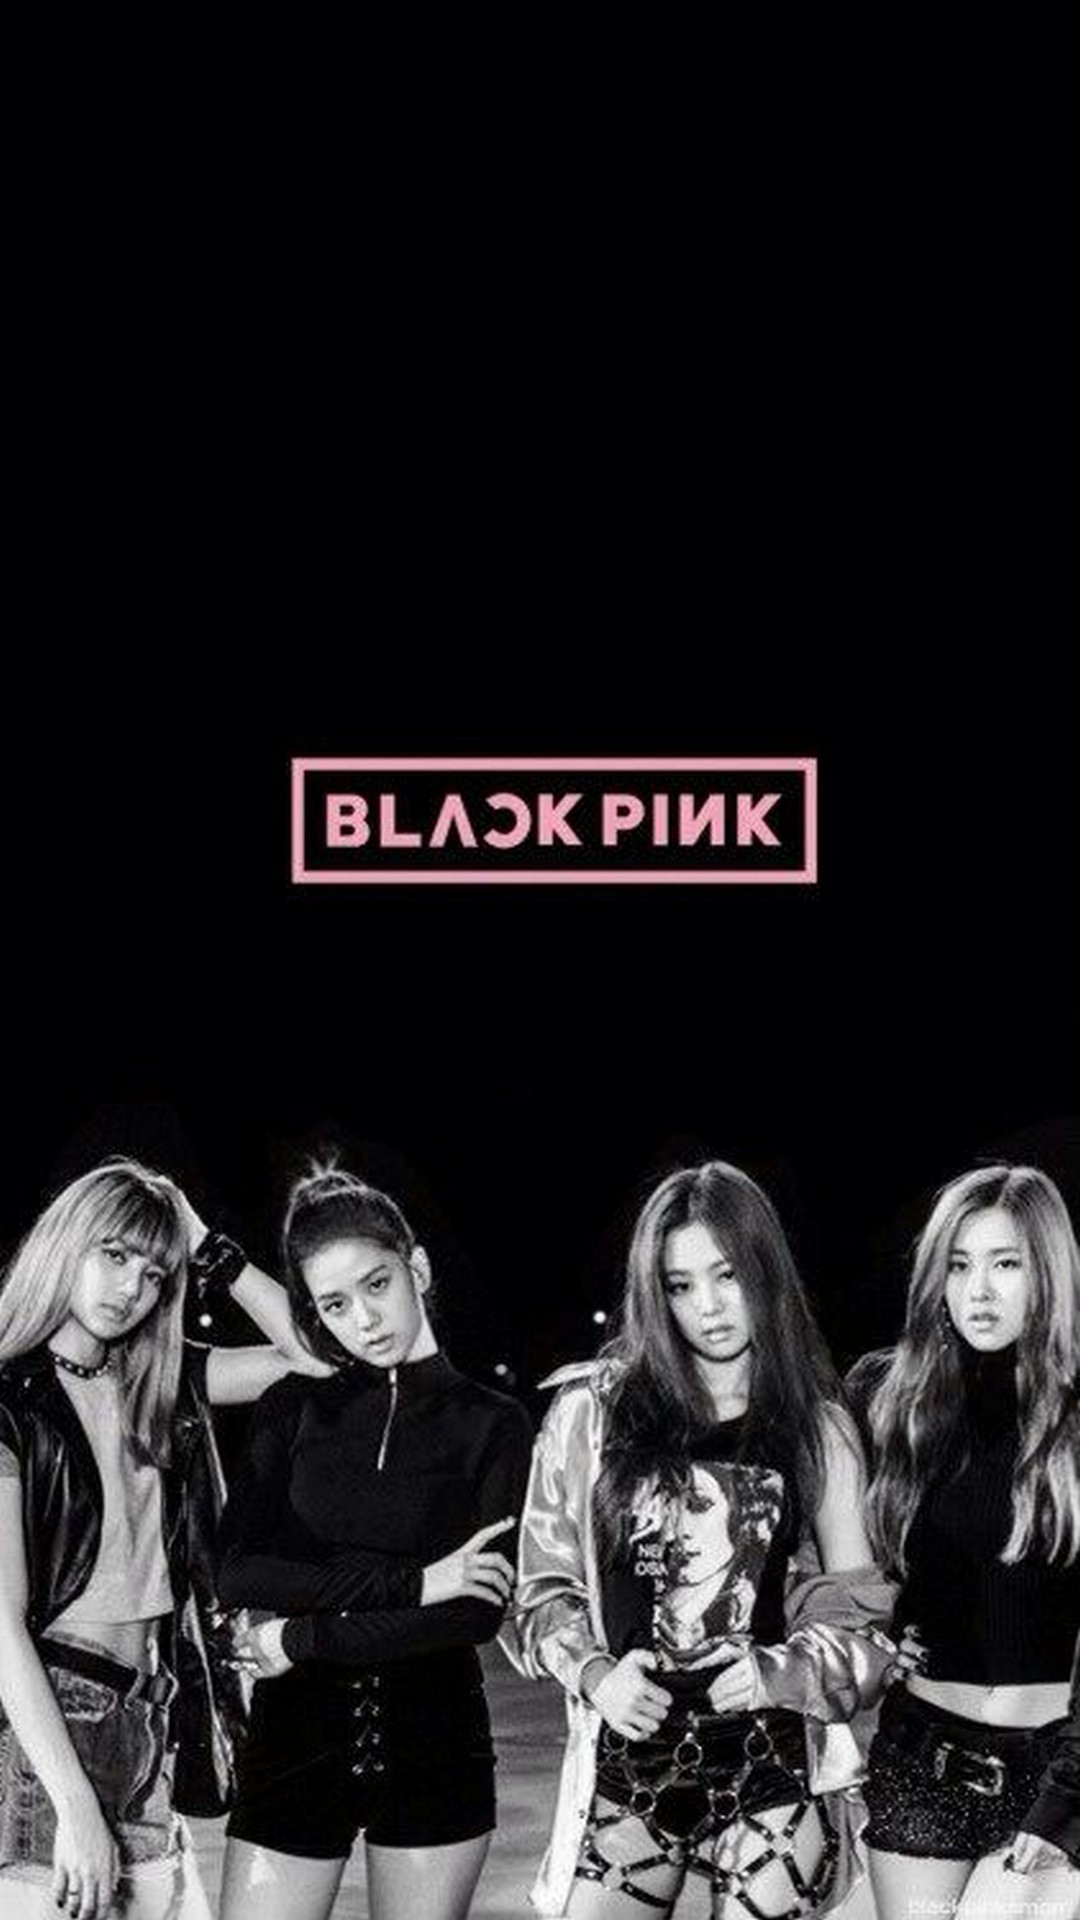 Blackpink iPhone Wallpaper Tumblr with high-resolution 1080x1920 pixel. You can set as wallpaper for Apple iPhone X, XS Max, XR, 8, 7, 6, SE, iPad. Enjoy and share your favorite HD wallpapers and background images